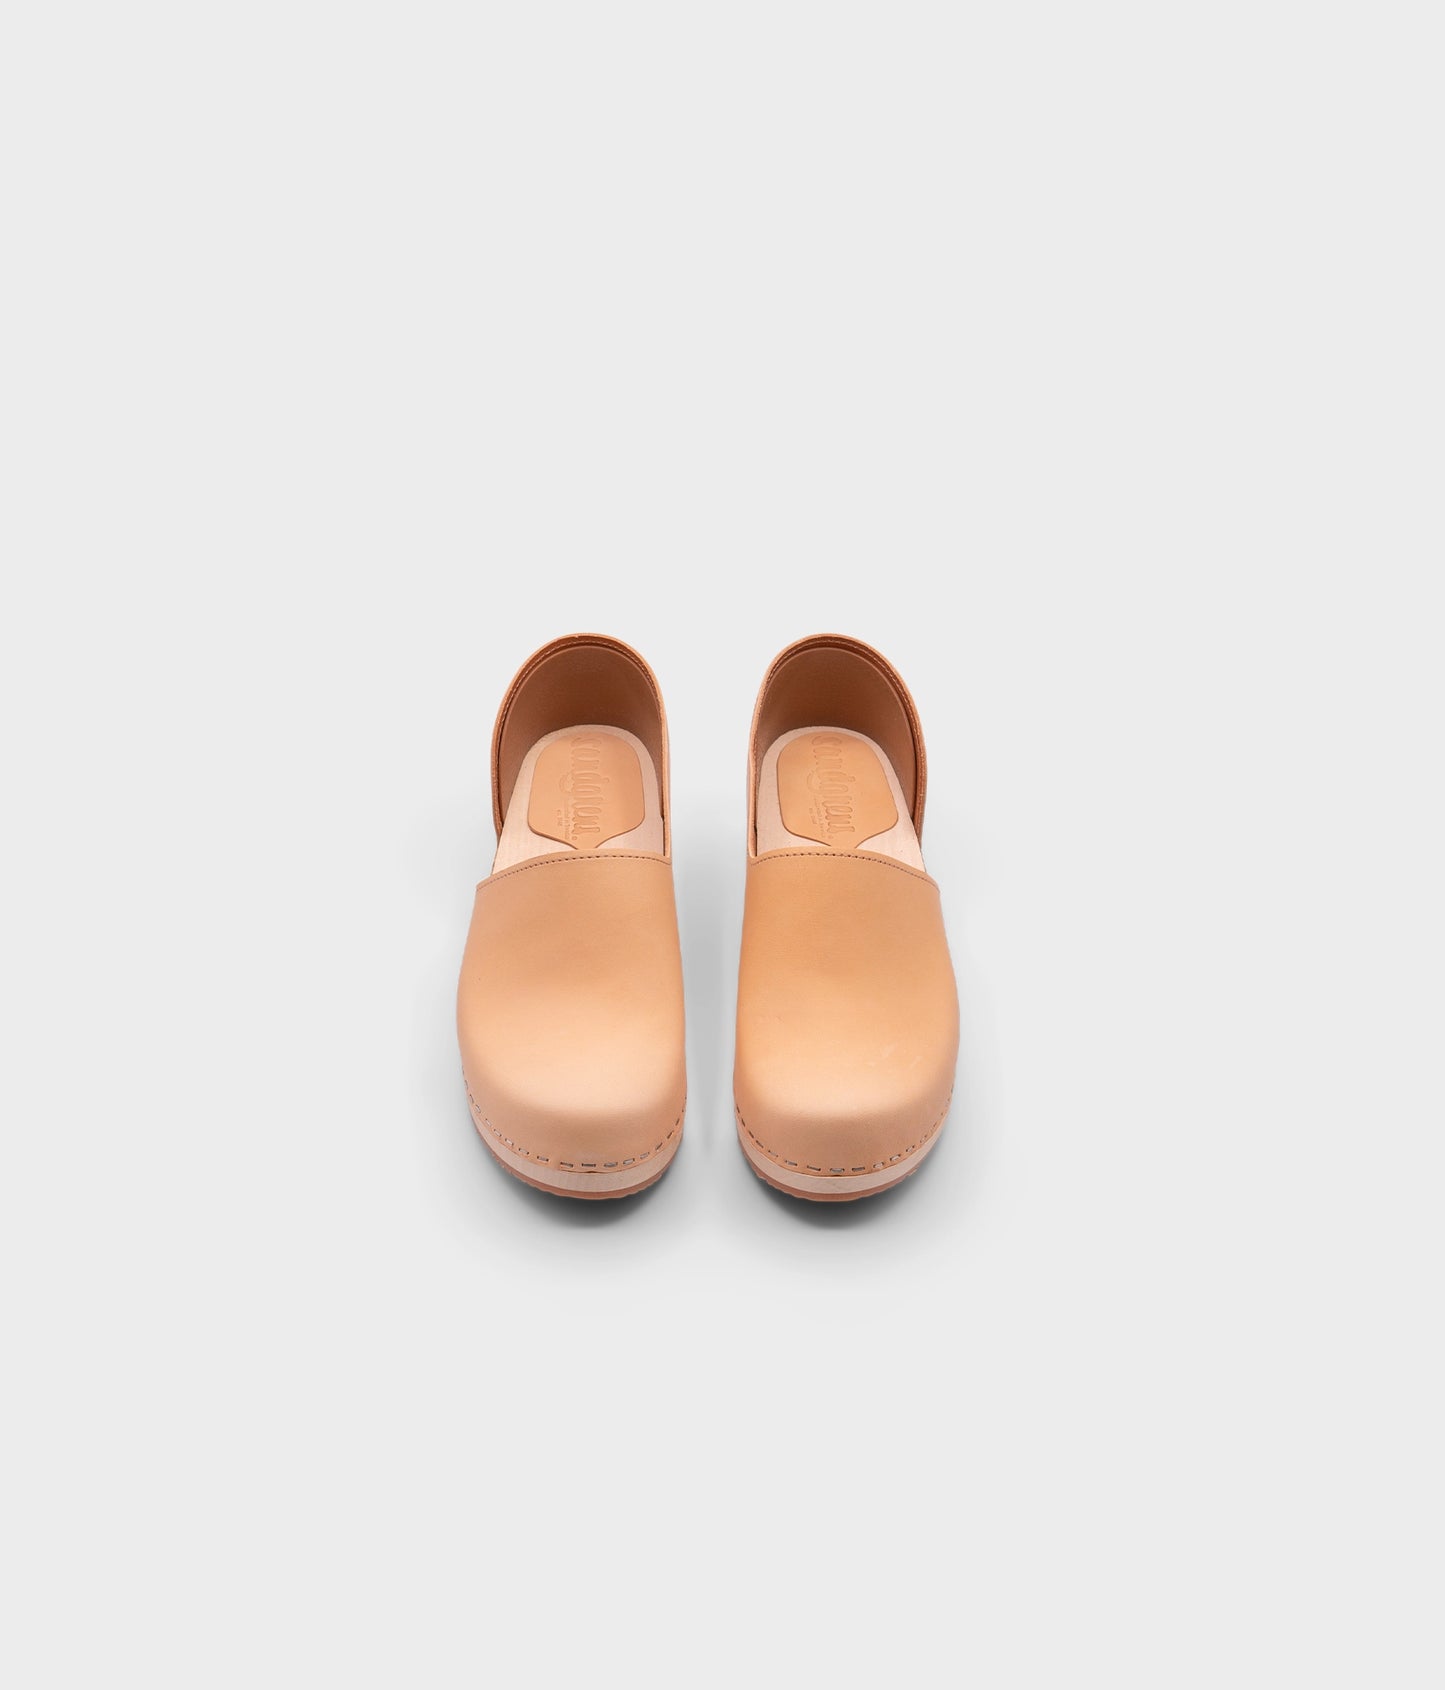 low heeled closed-back clogs in beige vegetable tanned leather stapled on a light wooden base